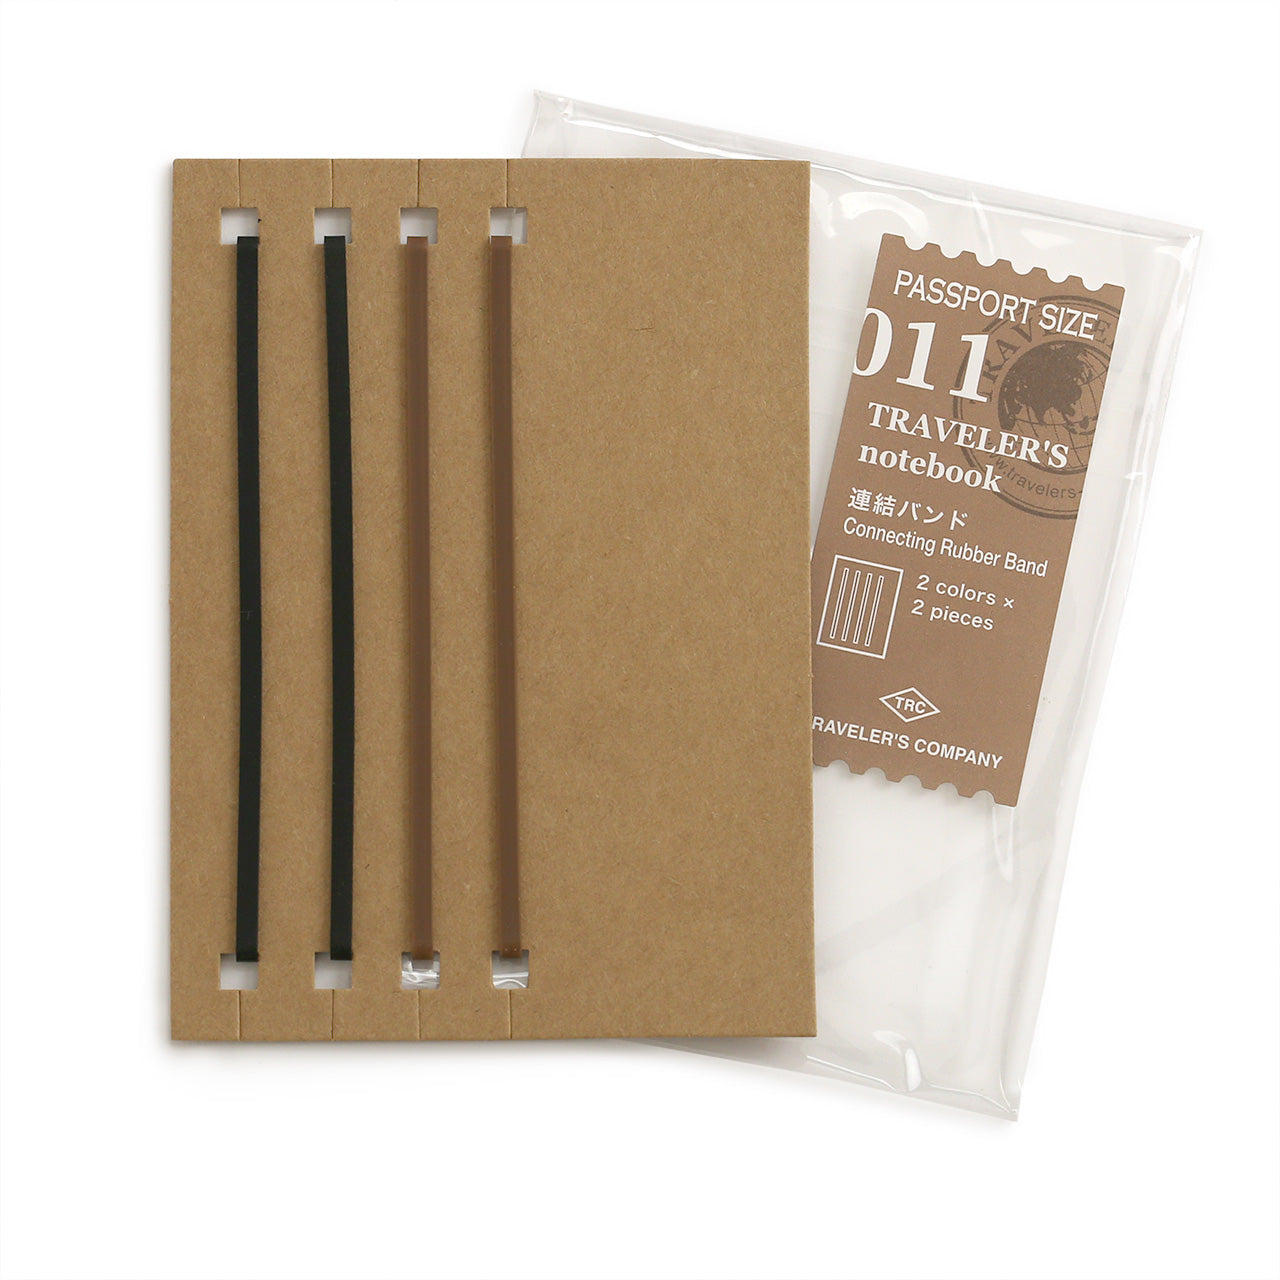 Connecting bands for passport sized notebooks, card with brown label